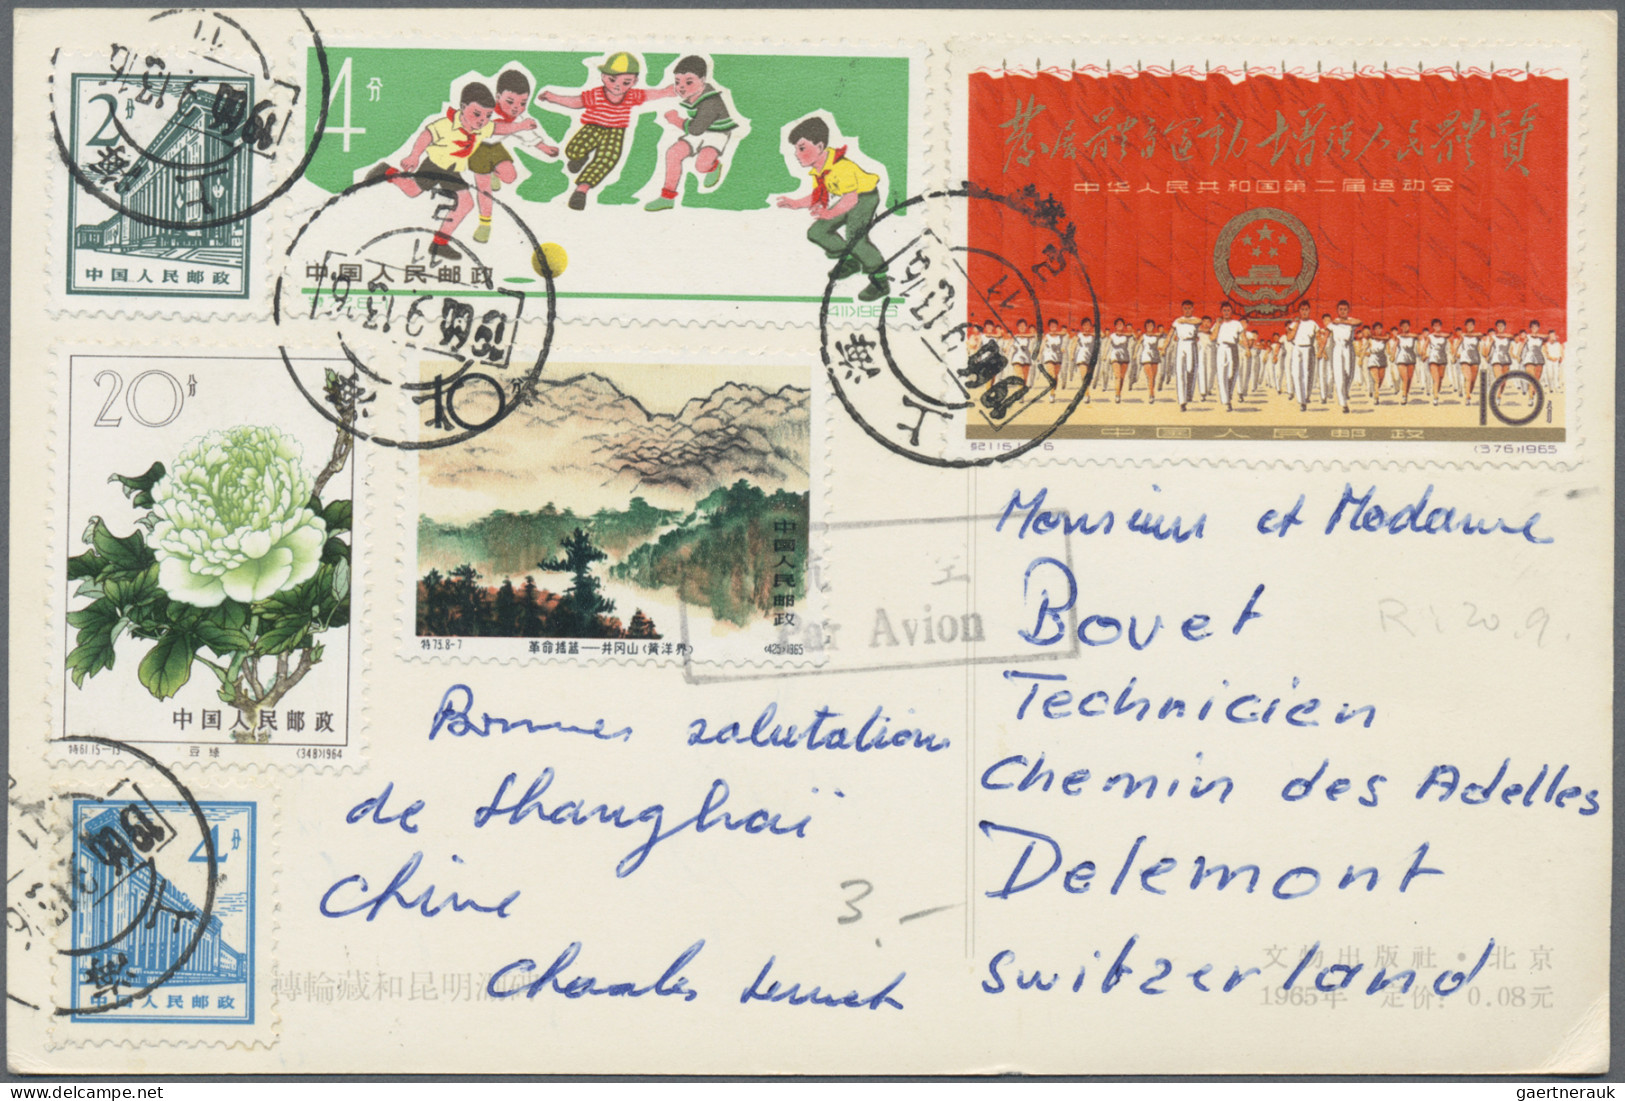 China (PRC): 1960/1970s, covers (21) or ppc (2) used foreign inc. peonies, Huang